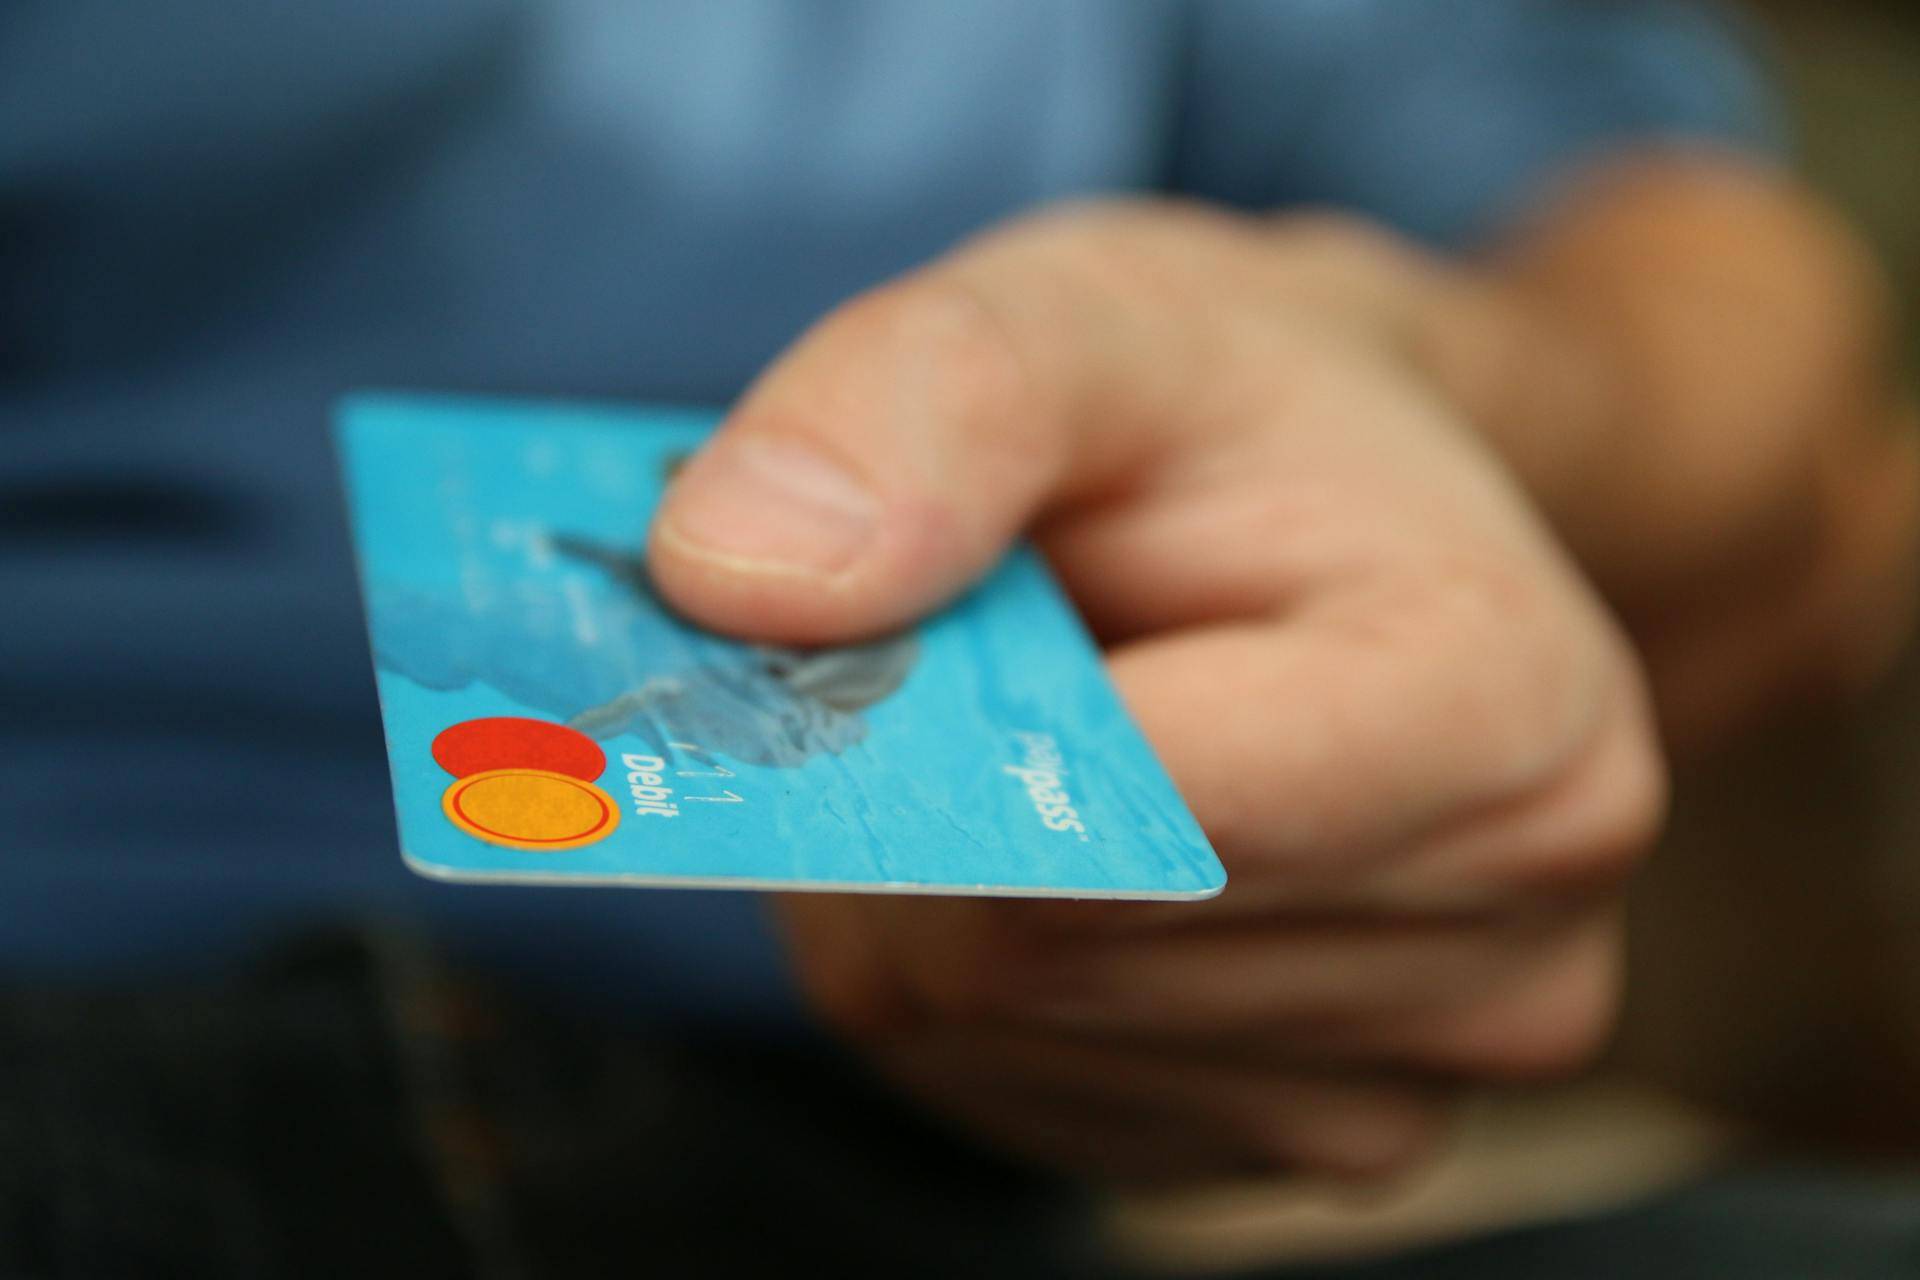 a Person handing over a Card at a Credit Union, representing the Importance of Standard Operating Procedures (SOPs) for a Workplace